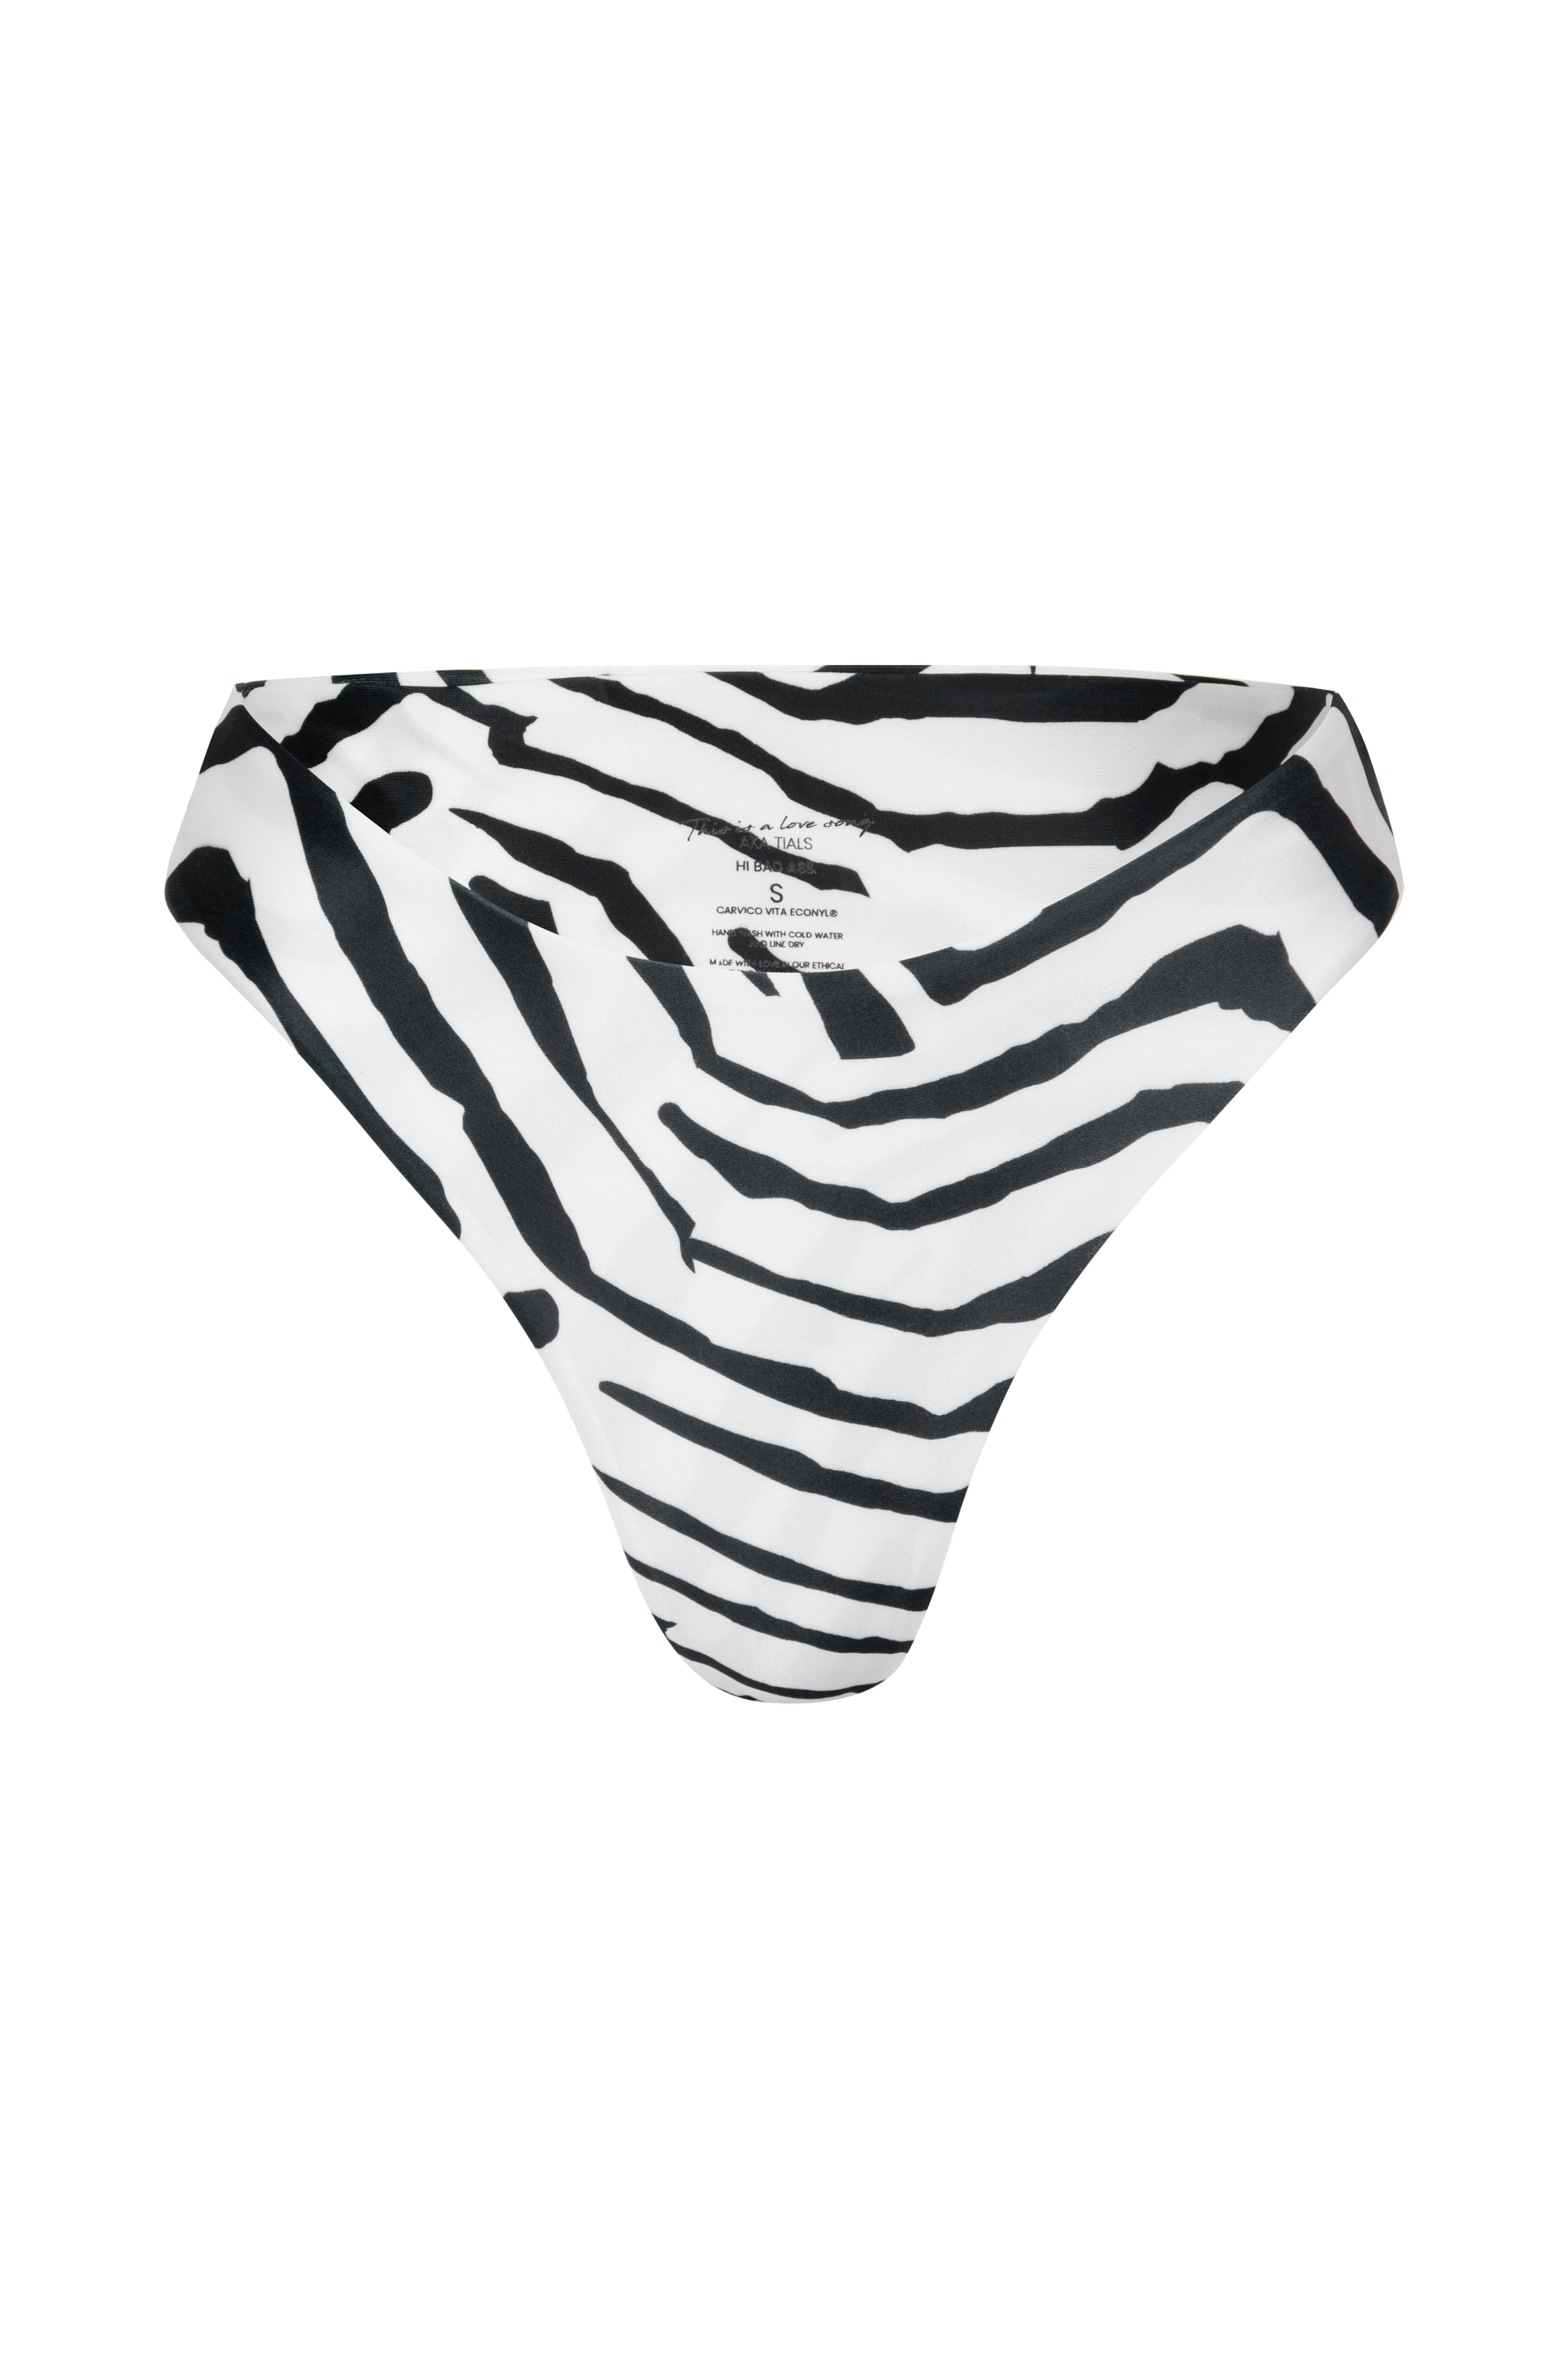 Zephyr Bottom Tiger Print - Swimwear THIS IS A LOVE SONG